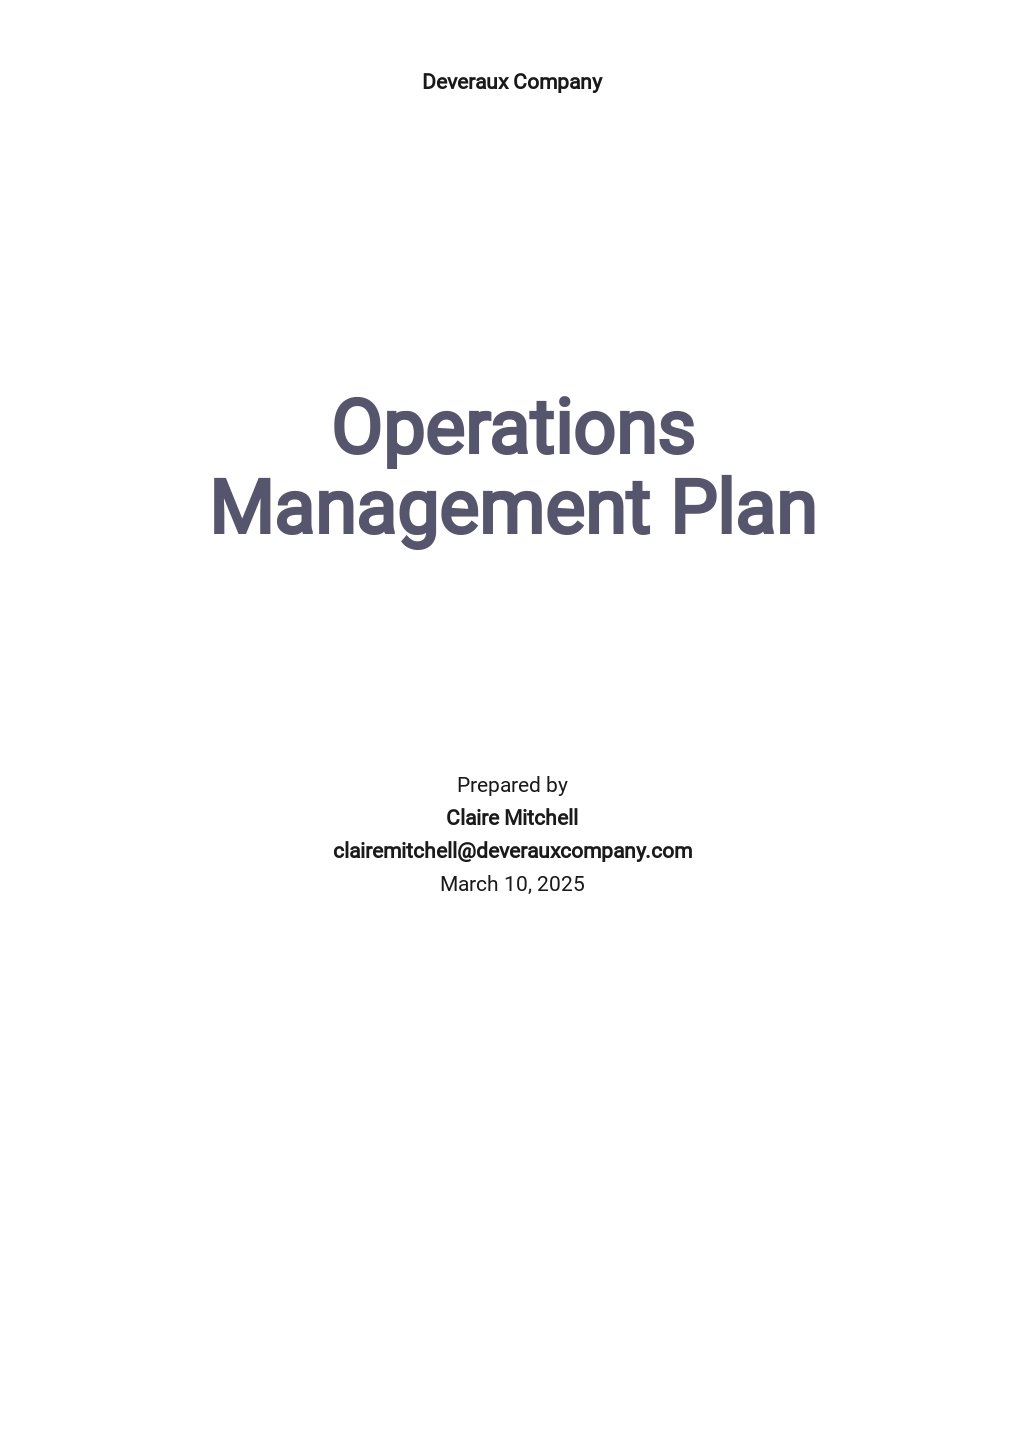 Operations Management Template